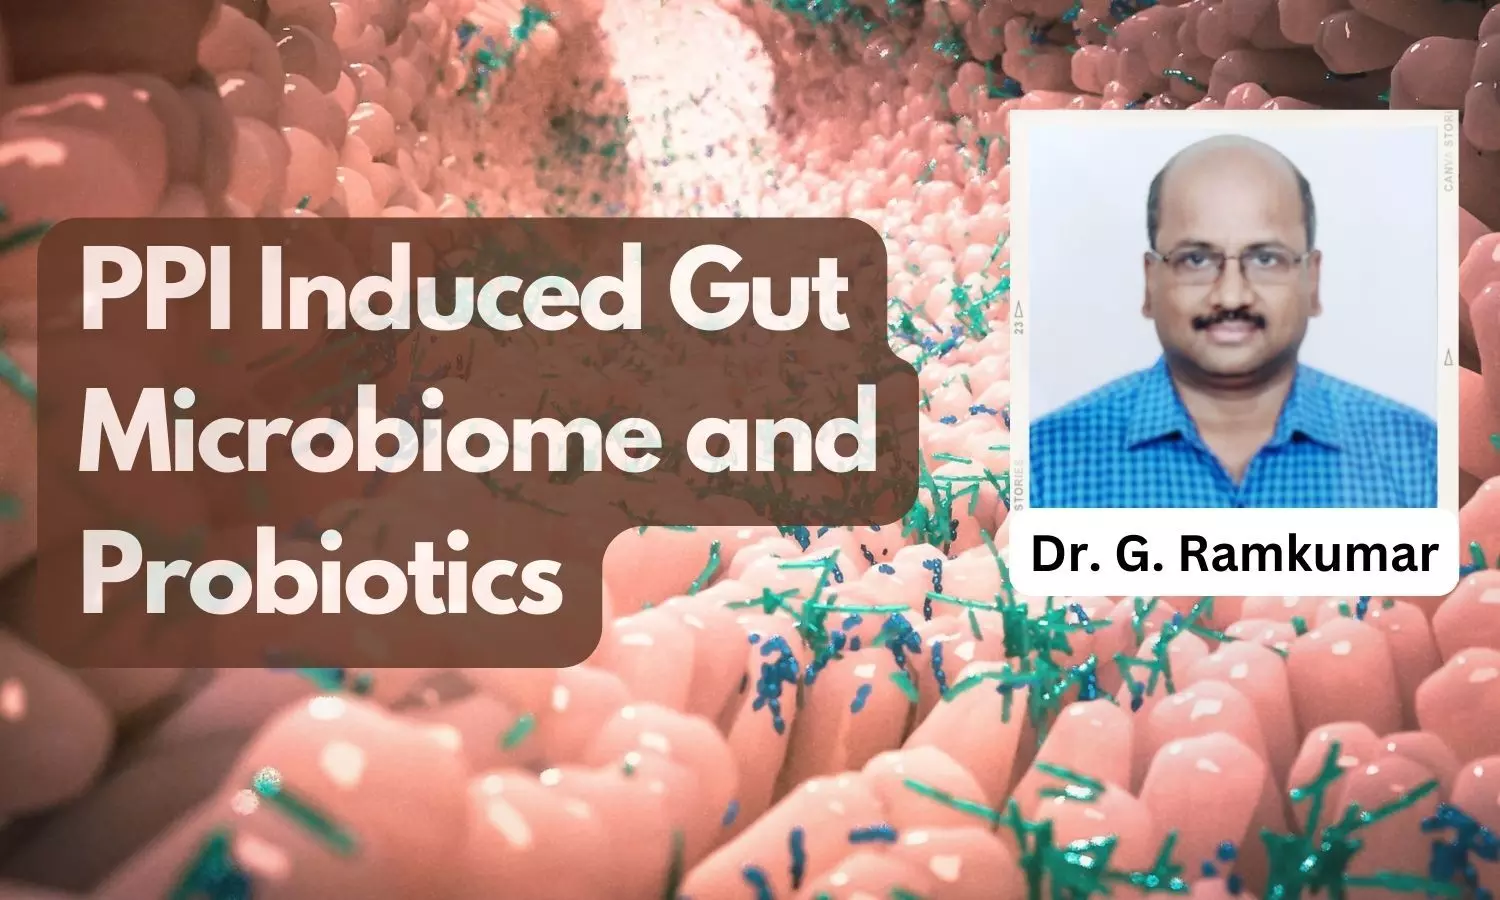 Effect of Long-term PPI use on gut microbiome and Potential Role of Probiotics